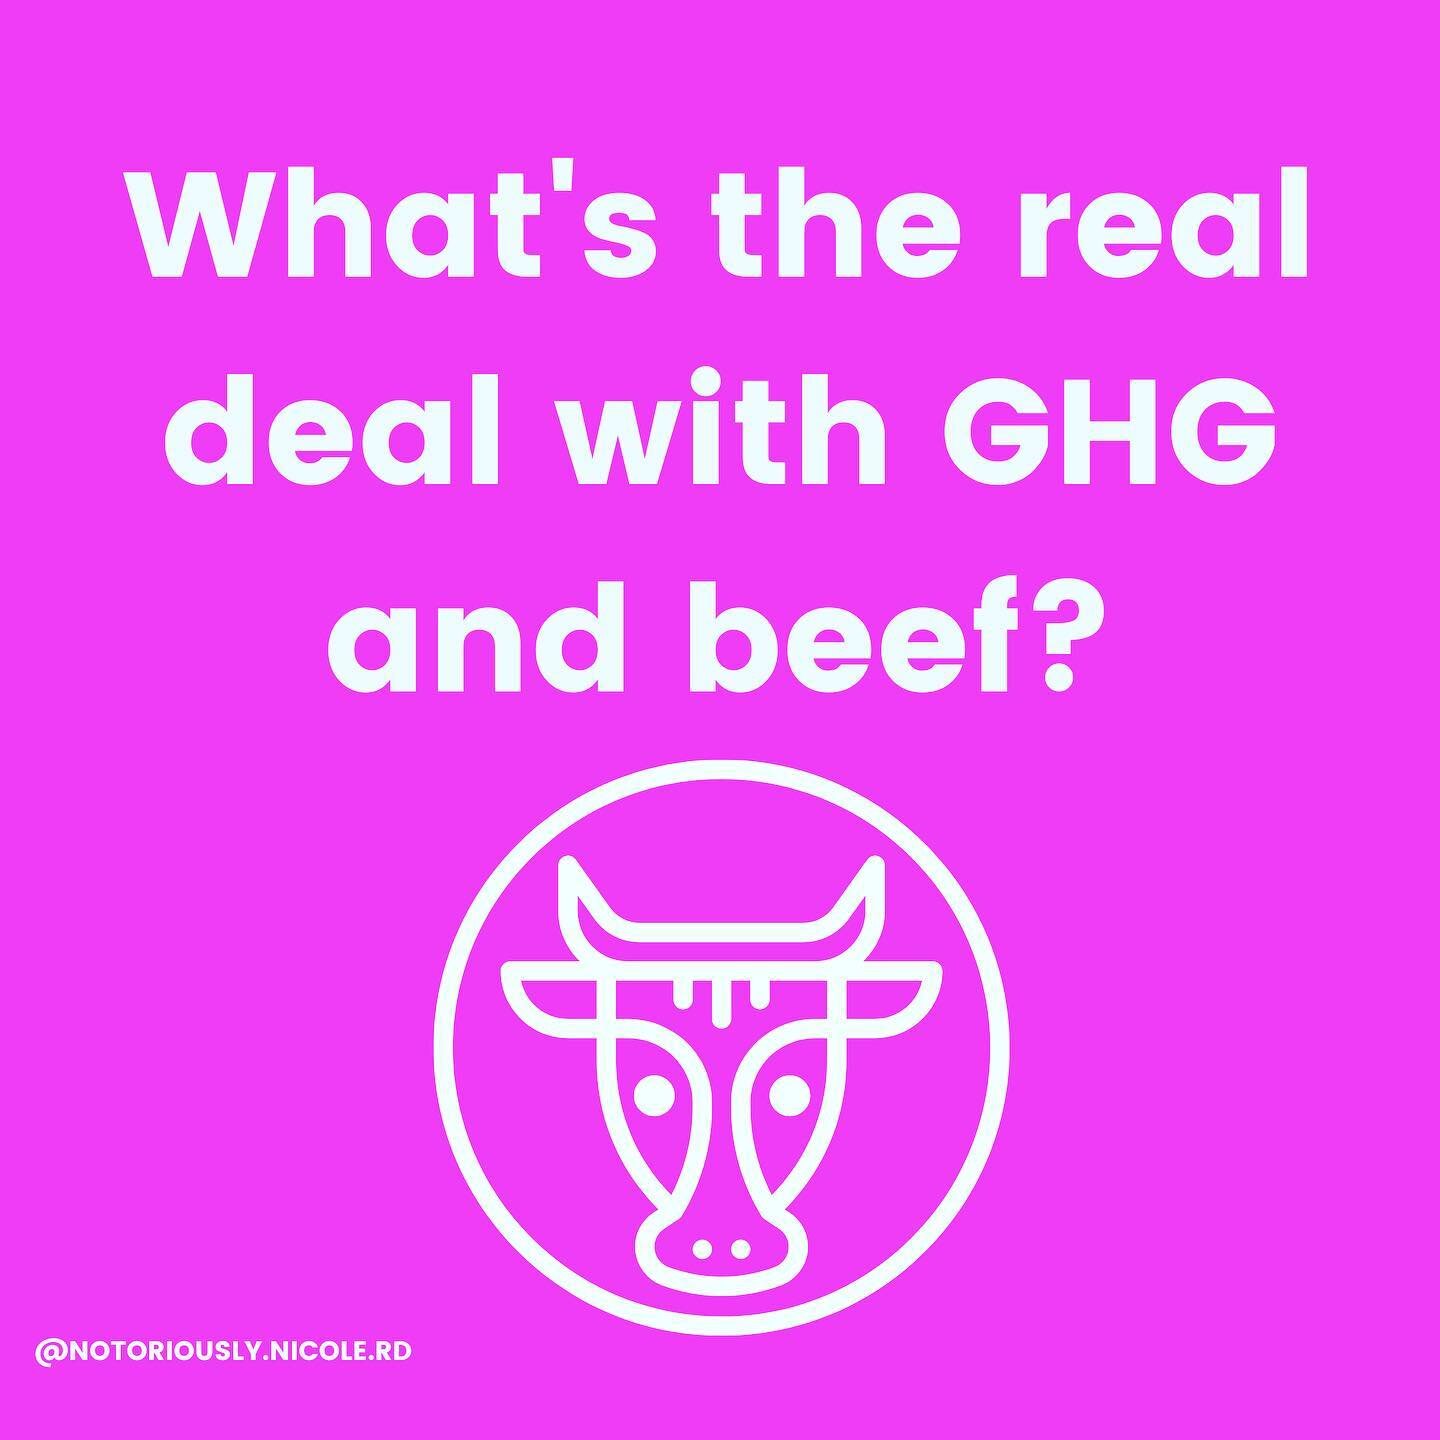 GHG stats gotcha scratching your head? Read this! 🥩 ❤️ ⬇️
.
.
.
.
.
You may have seen US beef production being conflated with either livestock in its entirety or the entire global beef market. Why does this matter? Well, farmers and ranchers who rai